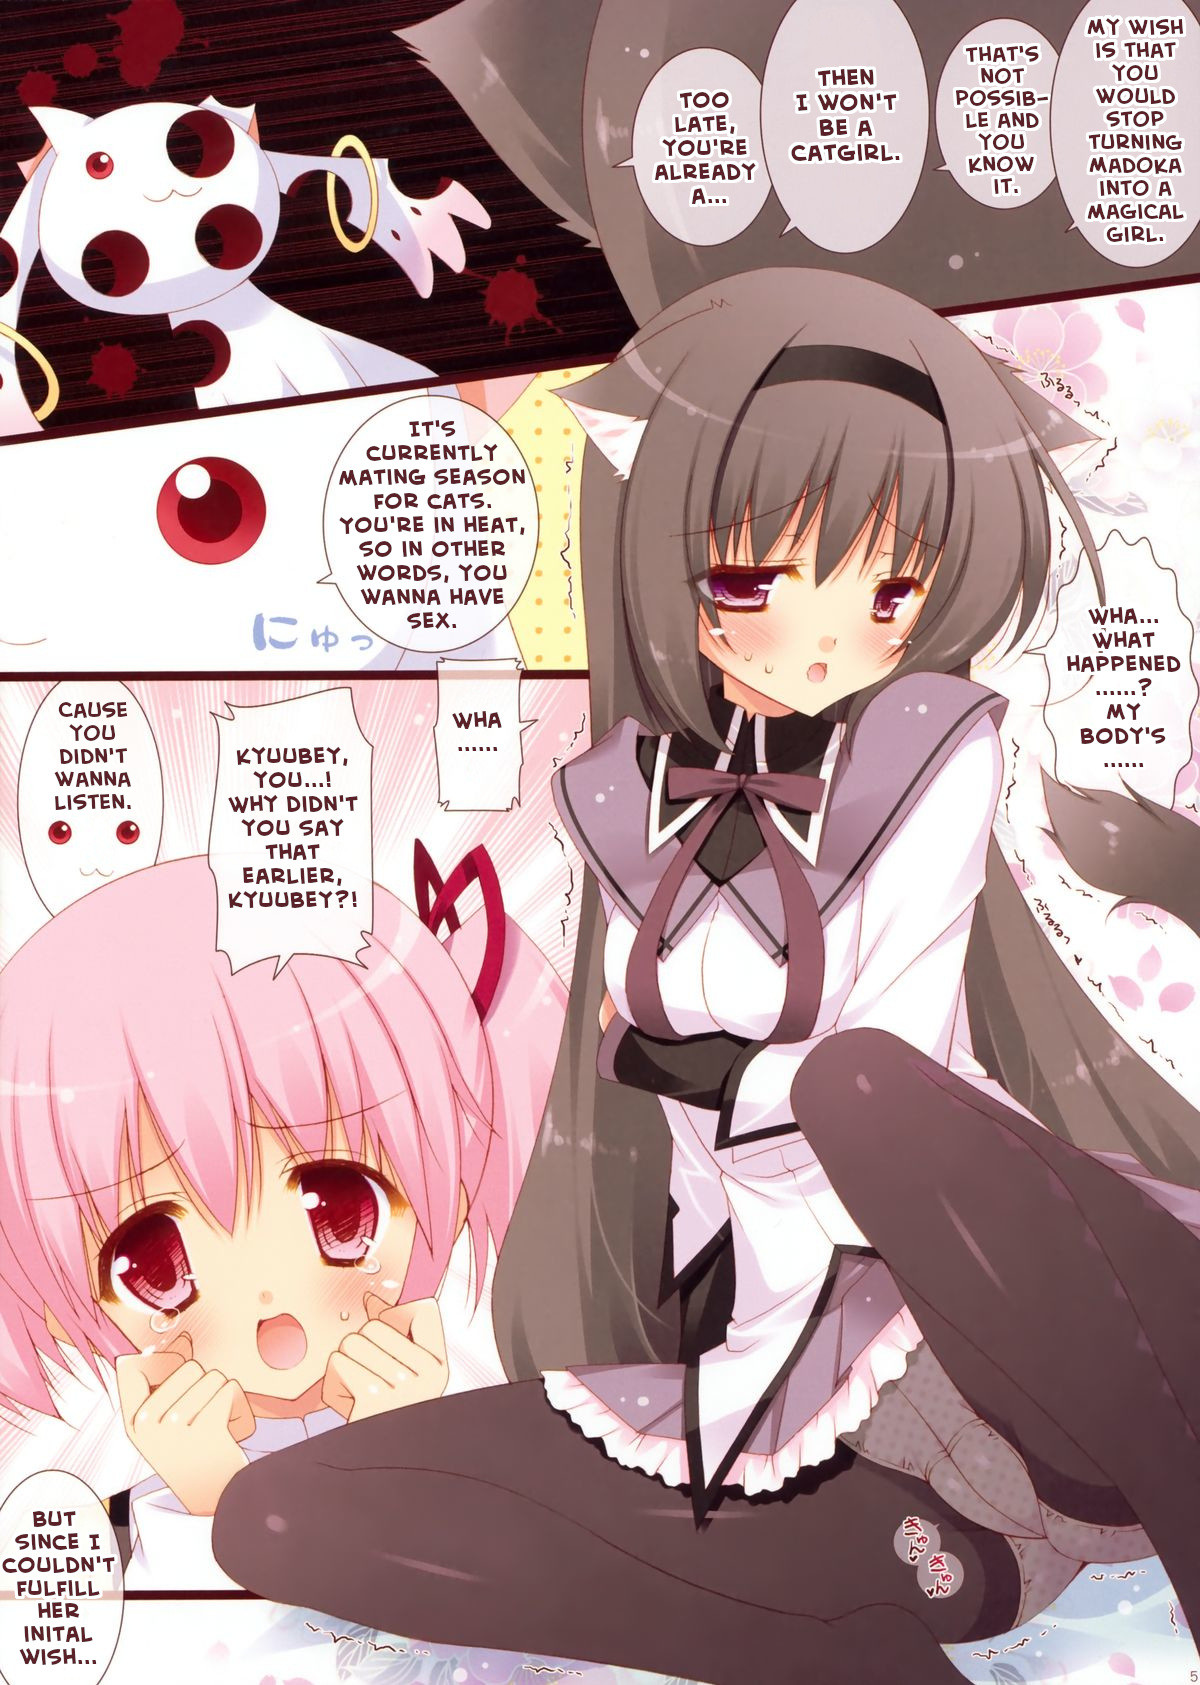 Hentai Manga Comic-Make a Contract With Me And Become a Catgirl!-Read-2